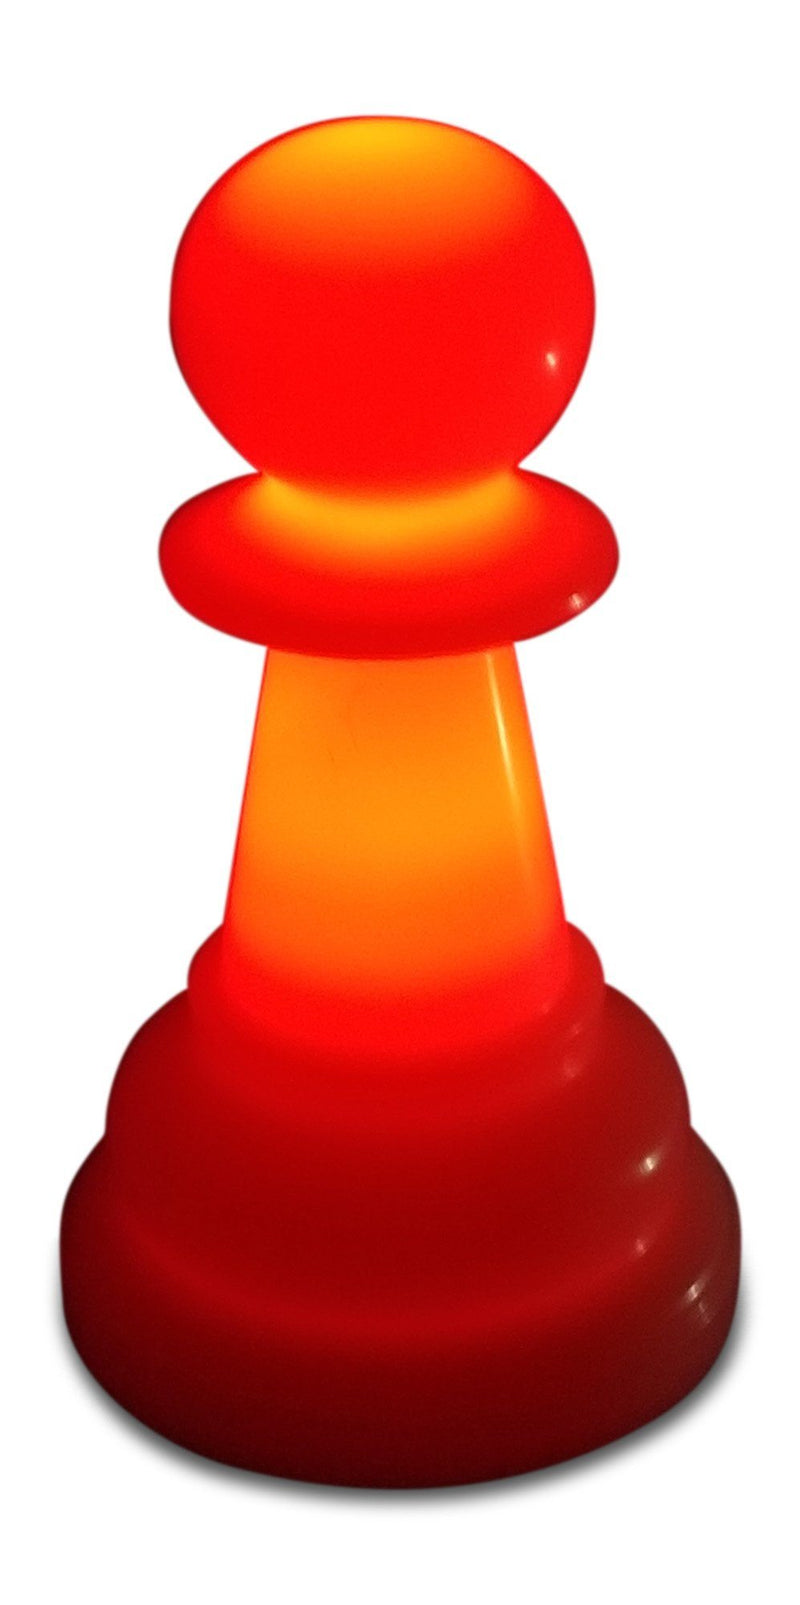 MegaChess 23 Inch Perfect Pawn Light-Up Giant Chess Piece - Red |  | MegaChess.com